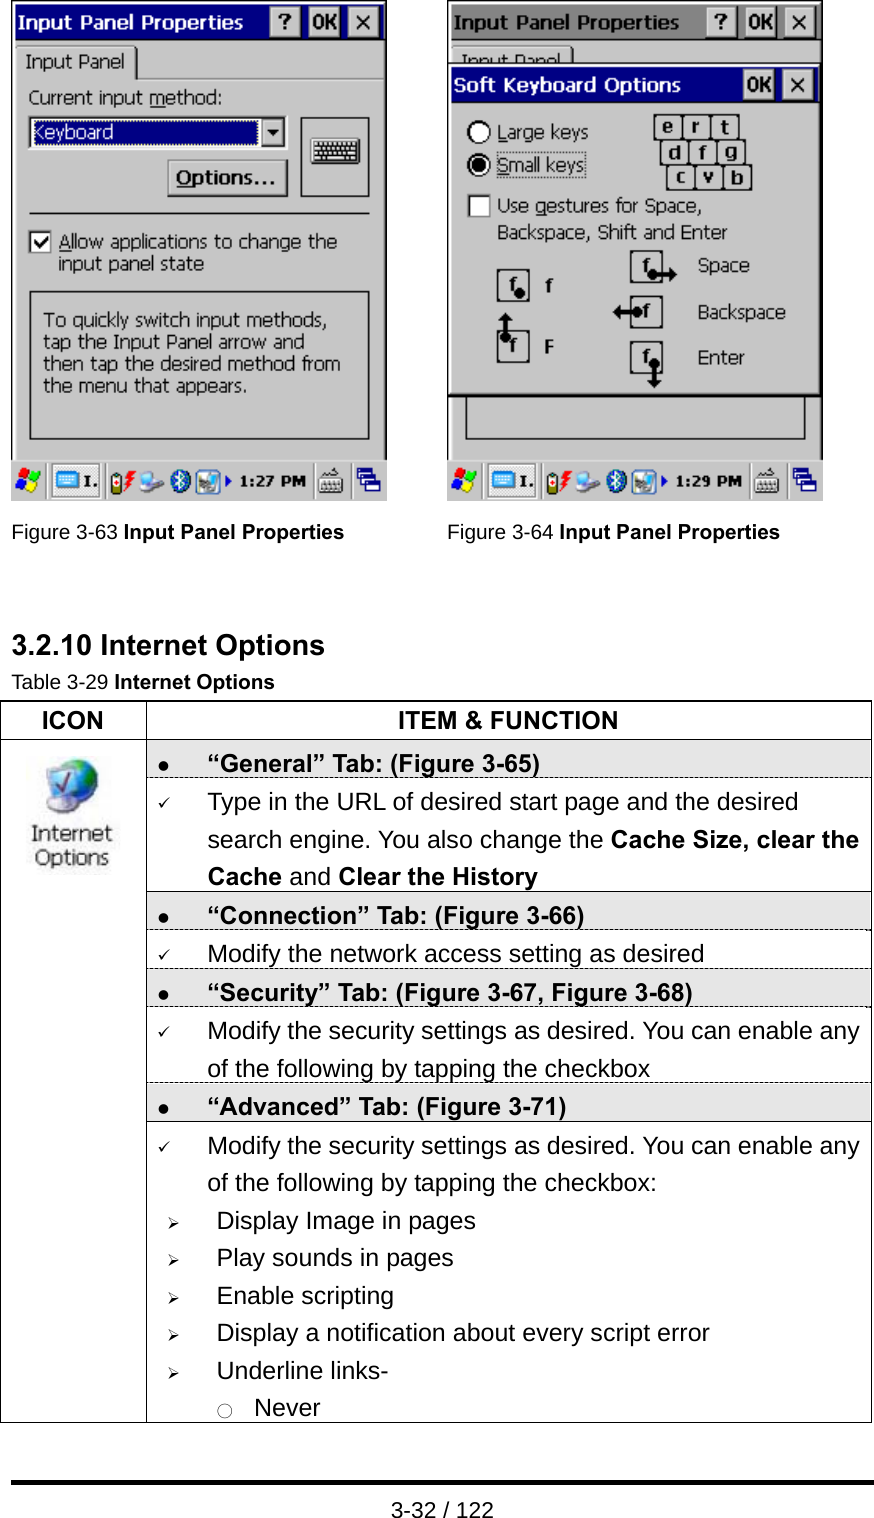  3-32 / 122    Figure 3-63 Input Panel Properties  Figure 3-64 Input Panel Properties   3.2.10 Internet Options Table 3-29 Internet Options ICON  ITEM &amp; FUNCTION z “General” Tab: (Figure 3-65) 9 Type in the URL of desired start page and the desired search engine. You also change the Cache Size, clear the Cache and Clear the History z “Connection” Tab: (Figure 3-66) 9 Modify the network access setting as desired z “Security” Tab: (Figure 3-67, Figure 3-68) 9 Modify the security settings as desired. You can enable any of the following by tapping the checkbox z “Advanced” Tab: (Figure 3-71)                9 Modify the security settings as desired. You can enable any of the following by tapping the checkbox: ¾ Display Image in pages ¾ Play sounds in pages ¾ Enable scripting ¾ Display a notification about every script error ¾ Underline links- ○  Never 